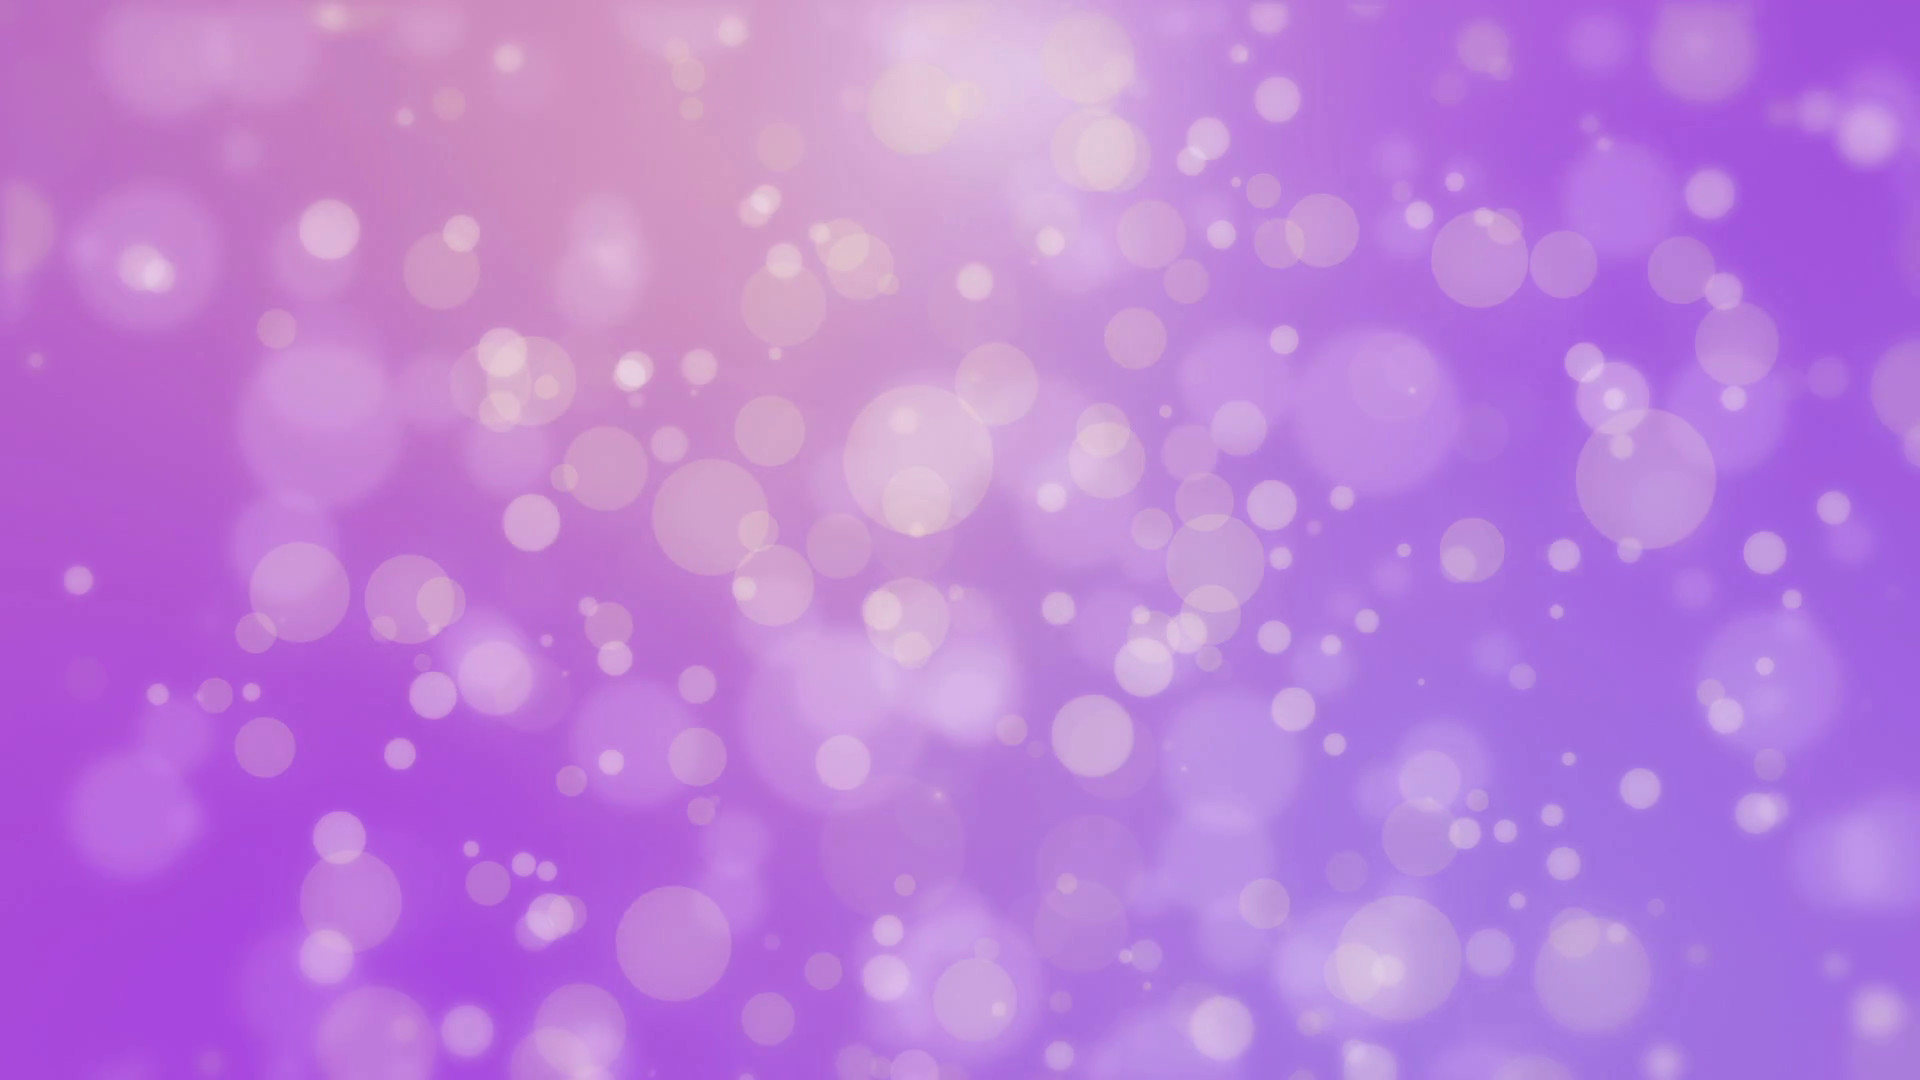 1920x1080 Beautiful purple background with glowing light particles creating a bokeh  effect